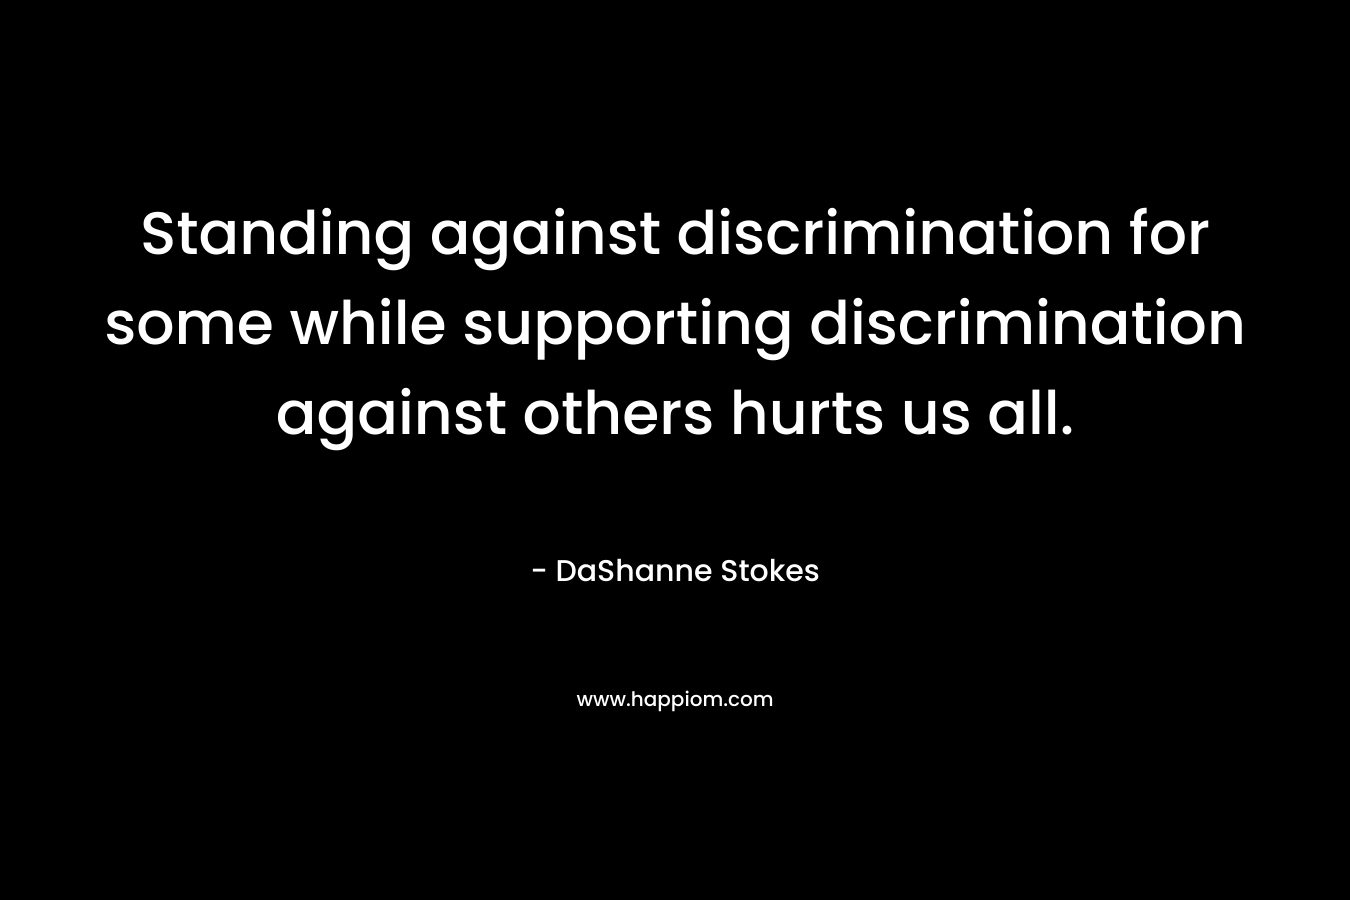 Standing against discrimination for some while supporting discrimination against others hurts us all.